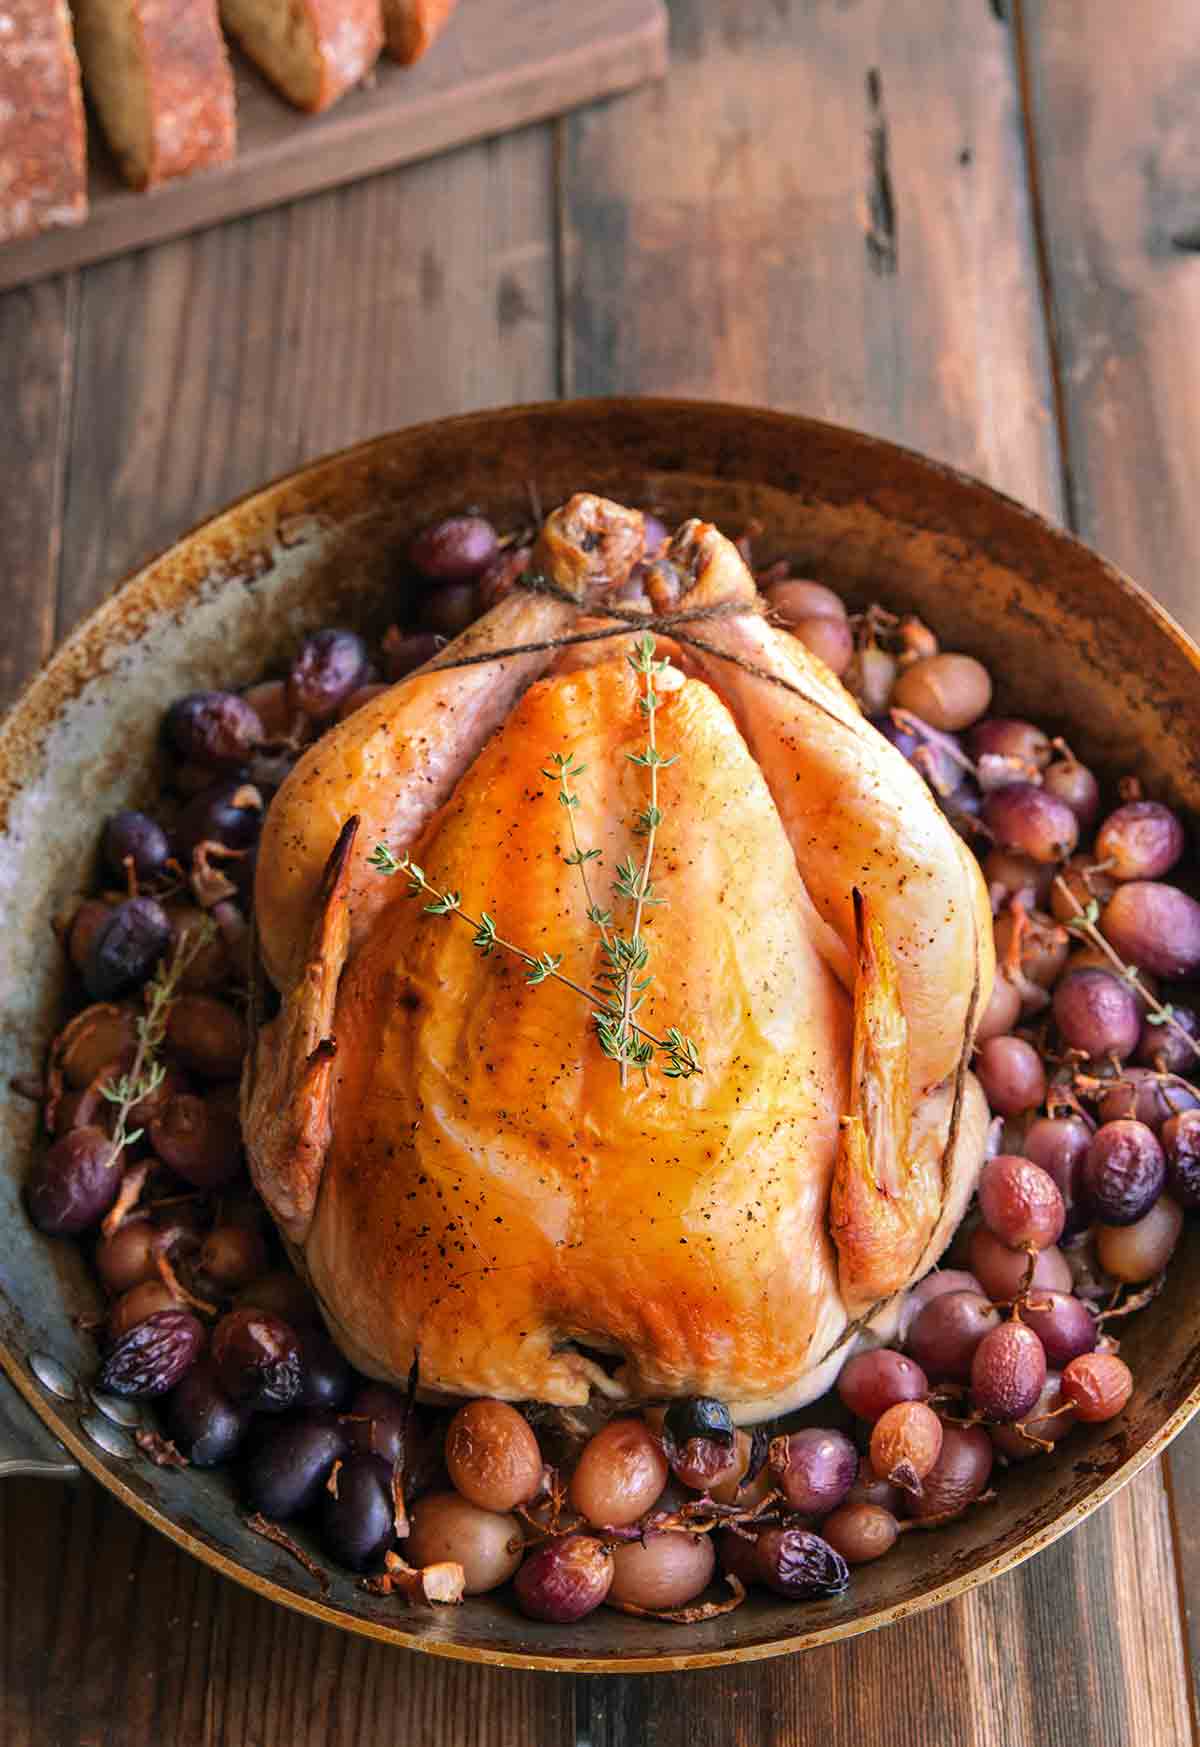 A whole simple roast chicken in a skillet, surrounded by grapes.